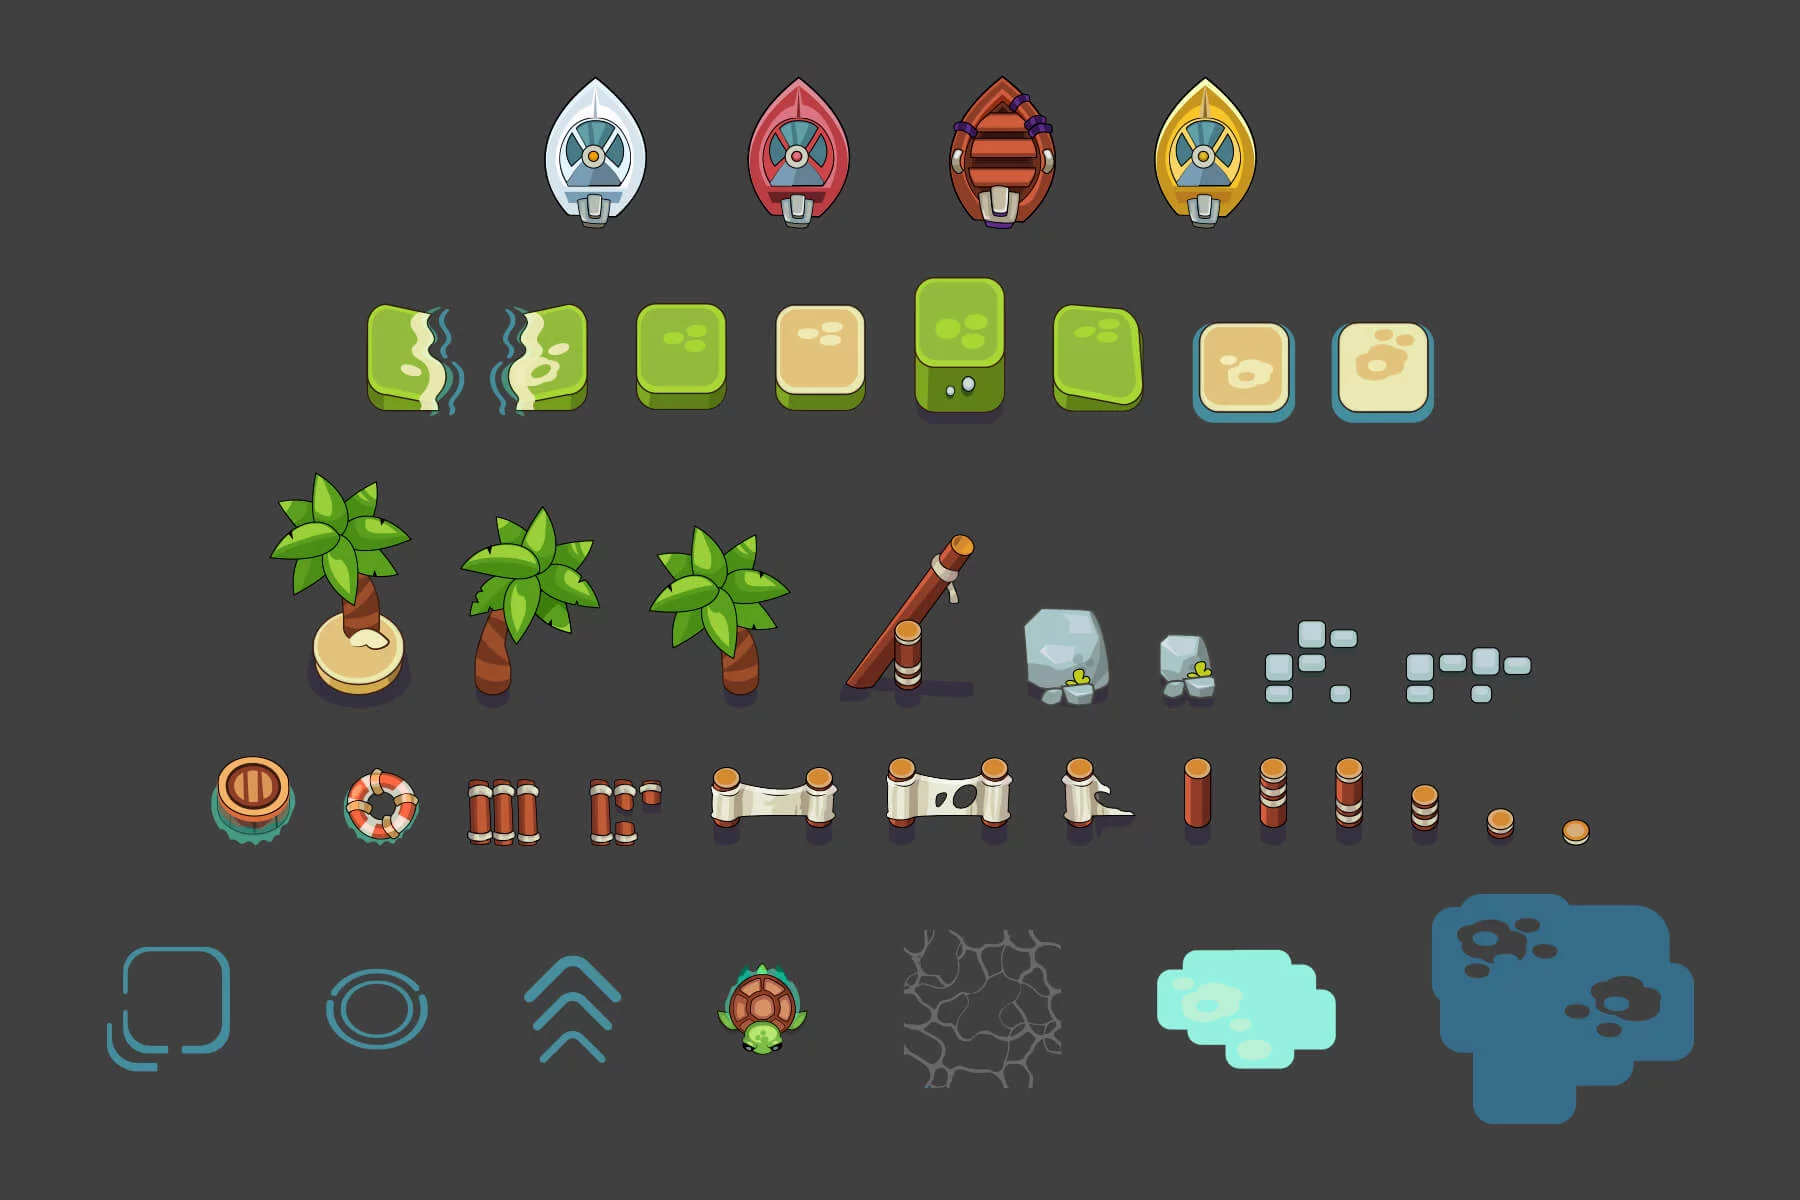 Top View Island Game Assets Pack Download 